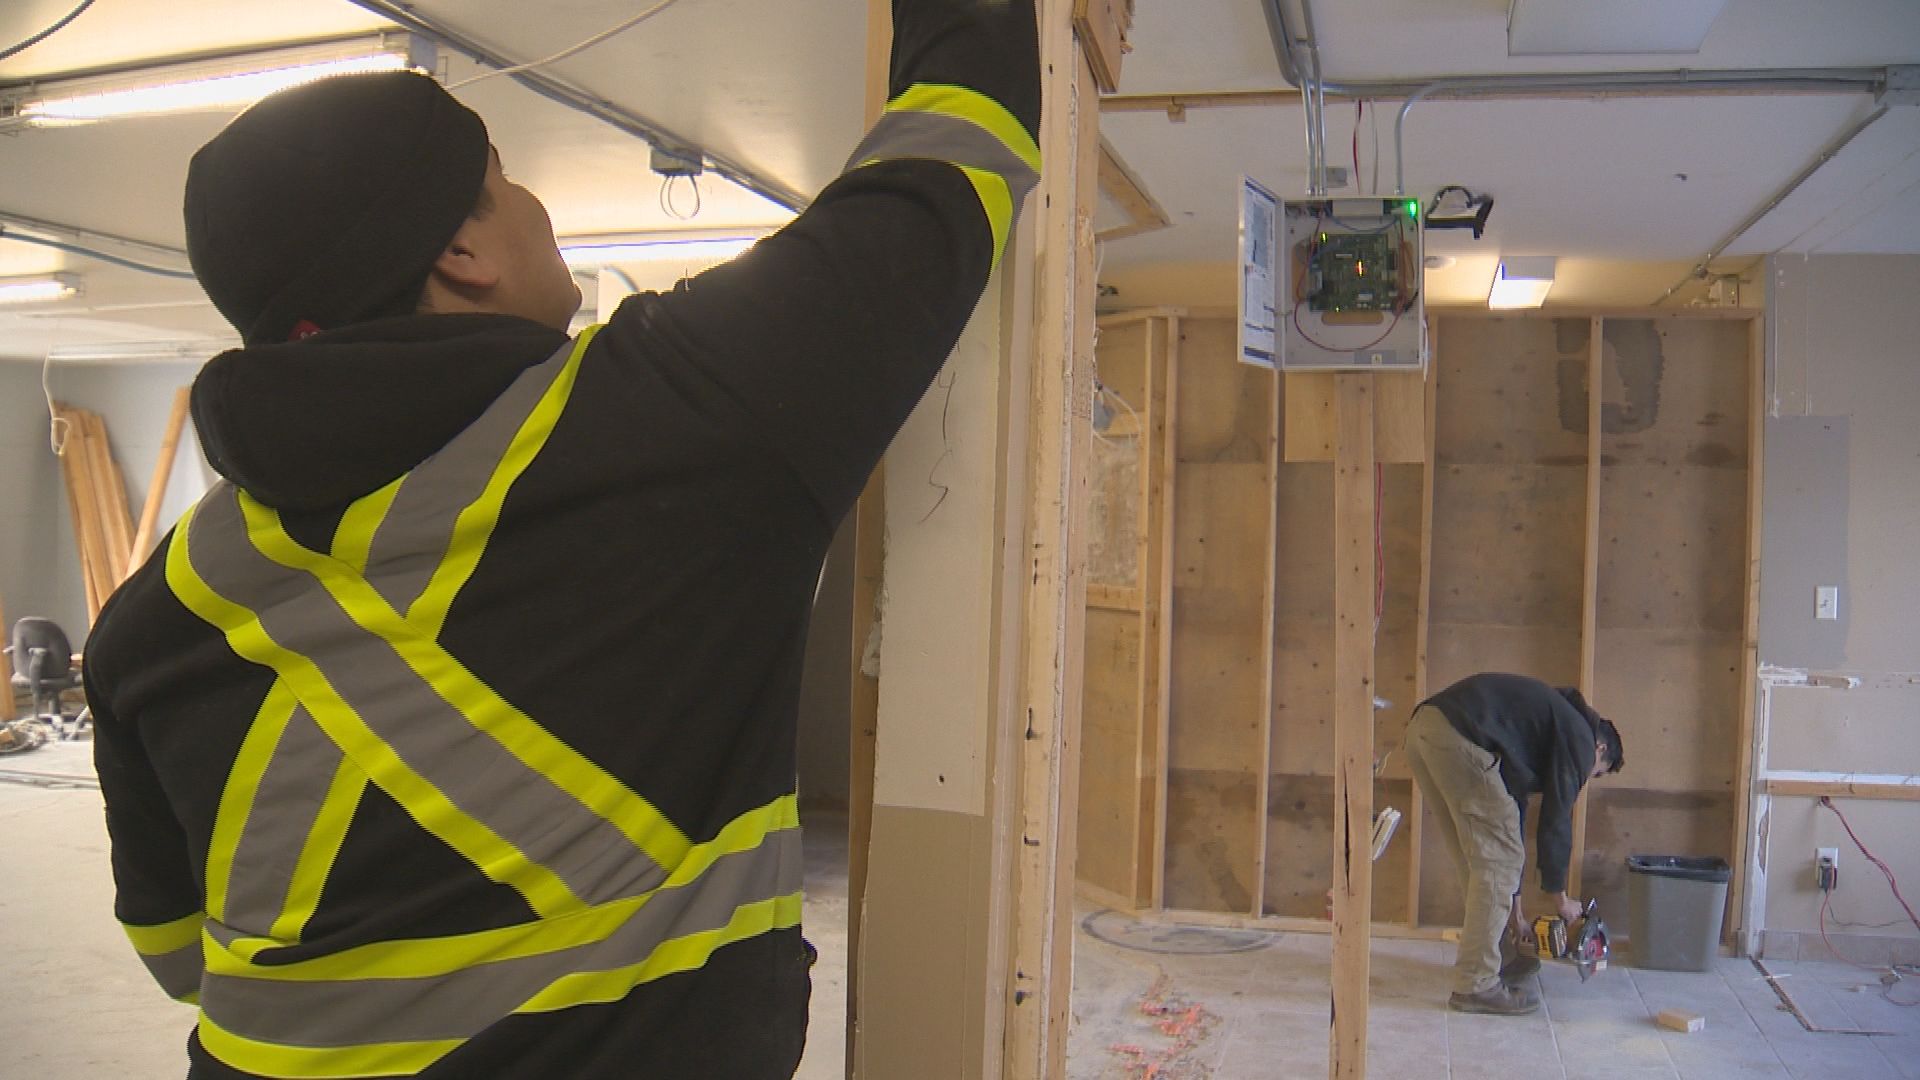 Winnipeg construction company helping inner-city youth, young adults find employment, community